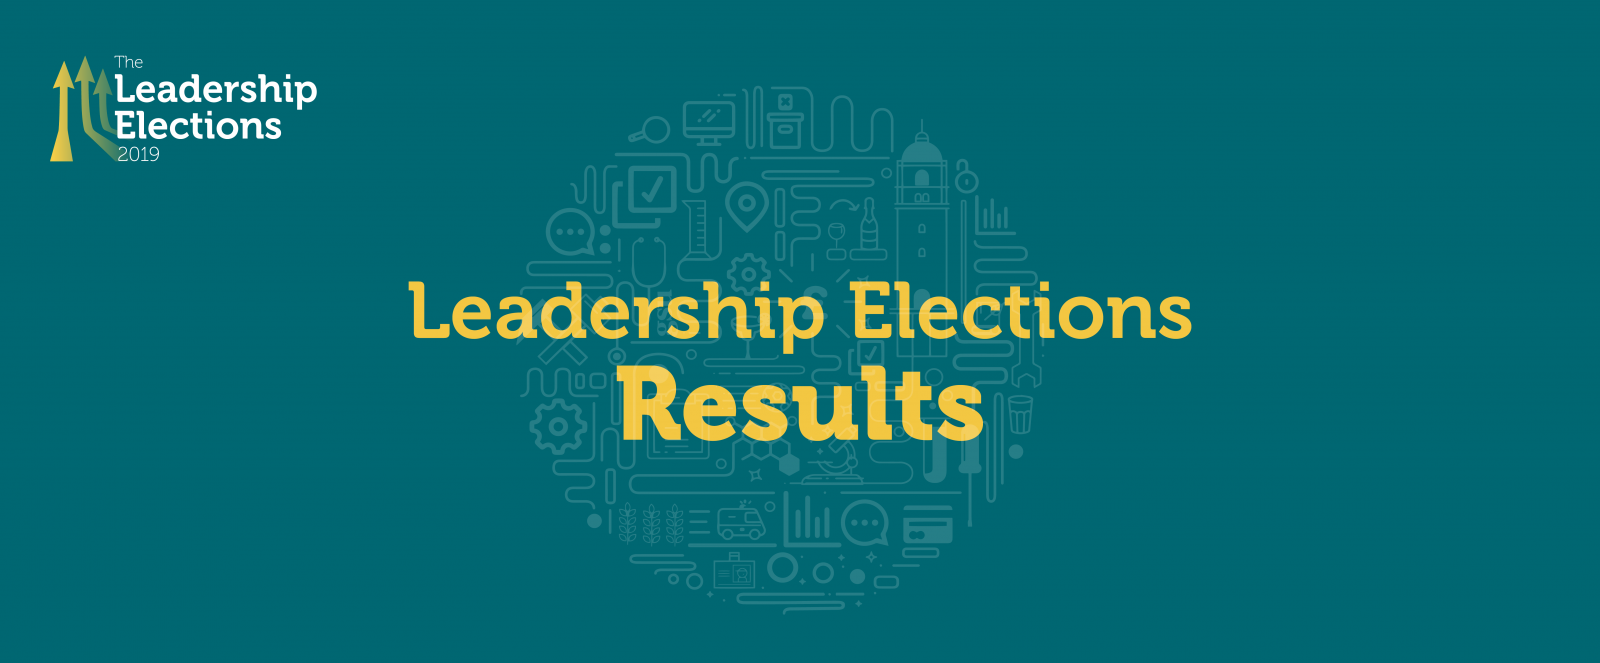 Leadership Elections | Imperial College Union